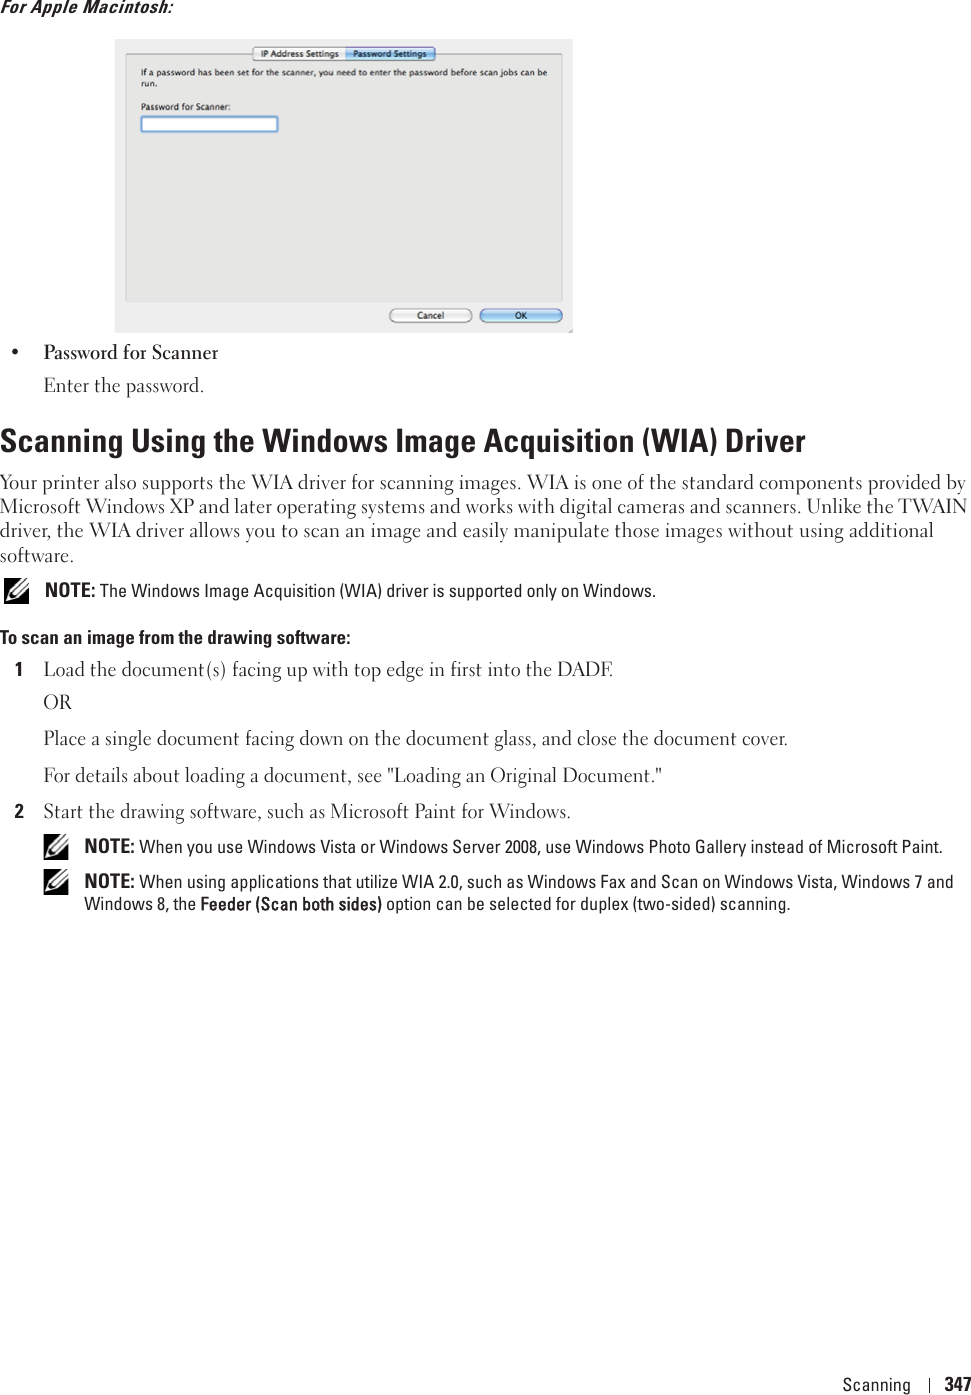 Scanning 347For Apple Macintosh:• Password for ScannerEnter the password.Scanning Using the Windows Image Acquisition (WIA) DriverYour printer also supports the WIA driver for scanning images. WIA is one of the standard components provided by Microsoft Windows XP and later operating systems and works with digital cameras and scanners. Unlike the TWAIN driver, the WIA driver allows you to scan an image and easily manipulate those images without using additional software. NOTE: The Windows Image Acquisition (WIA) driver is supported only on Windows.To scan an image from the drawing software:1Load the document(s) facing up with top edge in first into the DADF.ORPlace a single document facing down on the document glass, and close the document cover.For details about loading a document, see &quot;Loading an Original Document.&quot;2Start the drawing software, such as Microsoft Paint for Windows. NOTE: When you use Windows Vista or Windows Server 2008, use Windows Photo Gallery instead of Microsoft Paint. NOTE: When using applications that utilize WIA 2.0, such as Windows Fax and Scan on Windows Vista, Windows 7 and Windows 8, the FFeeder (Scan both sides) option can be selected for duplex (two-sided) scanning.